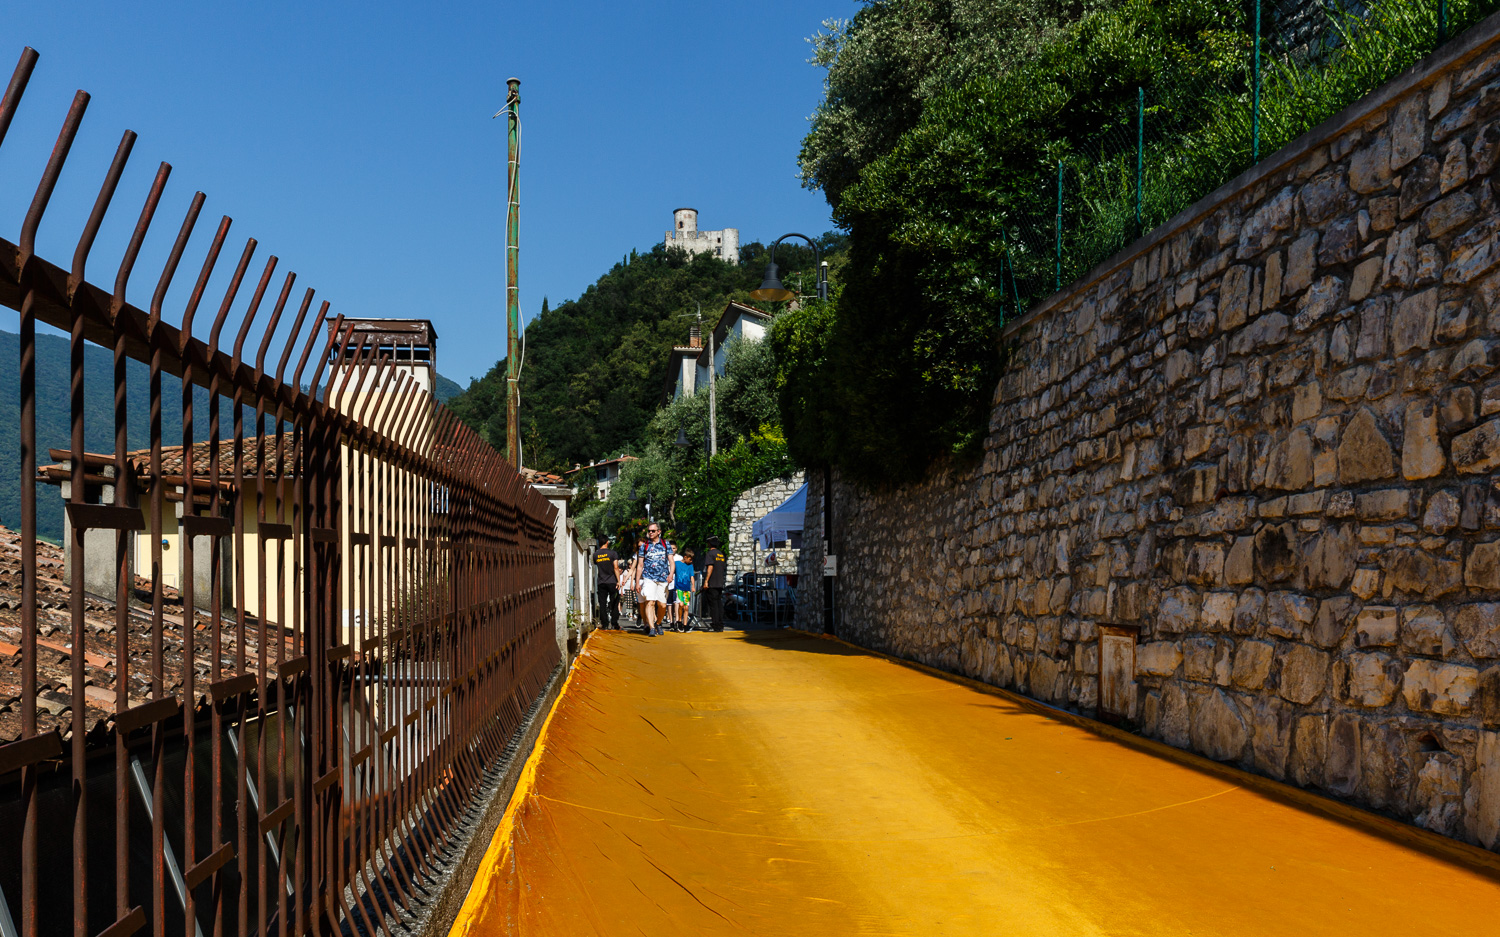 The Floating Piers - Monte Isola